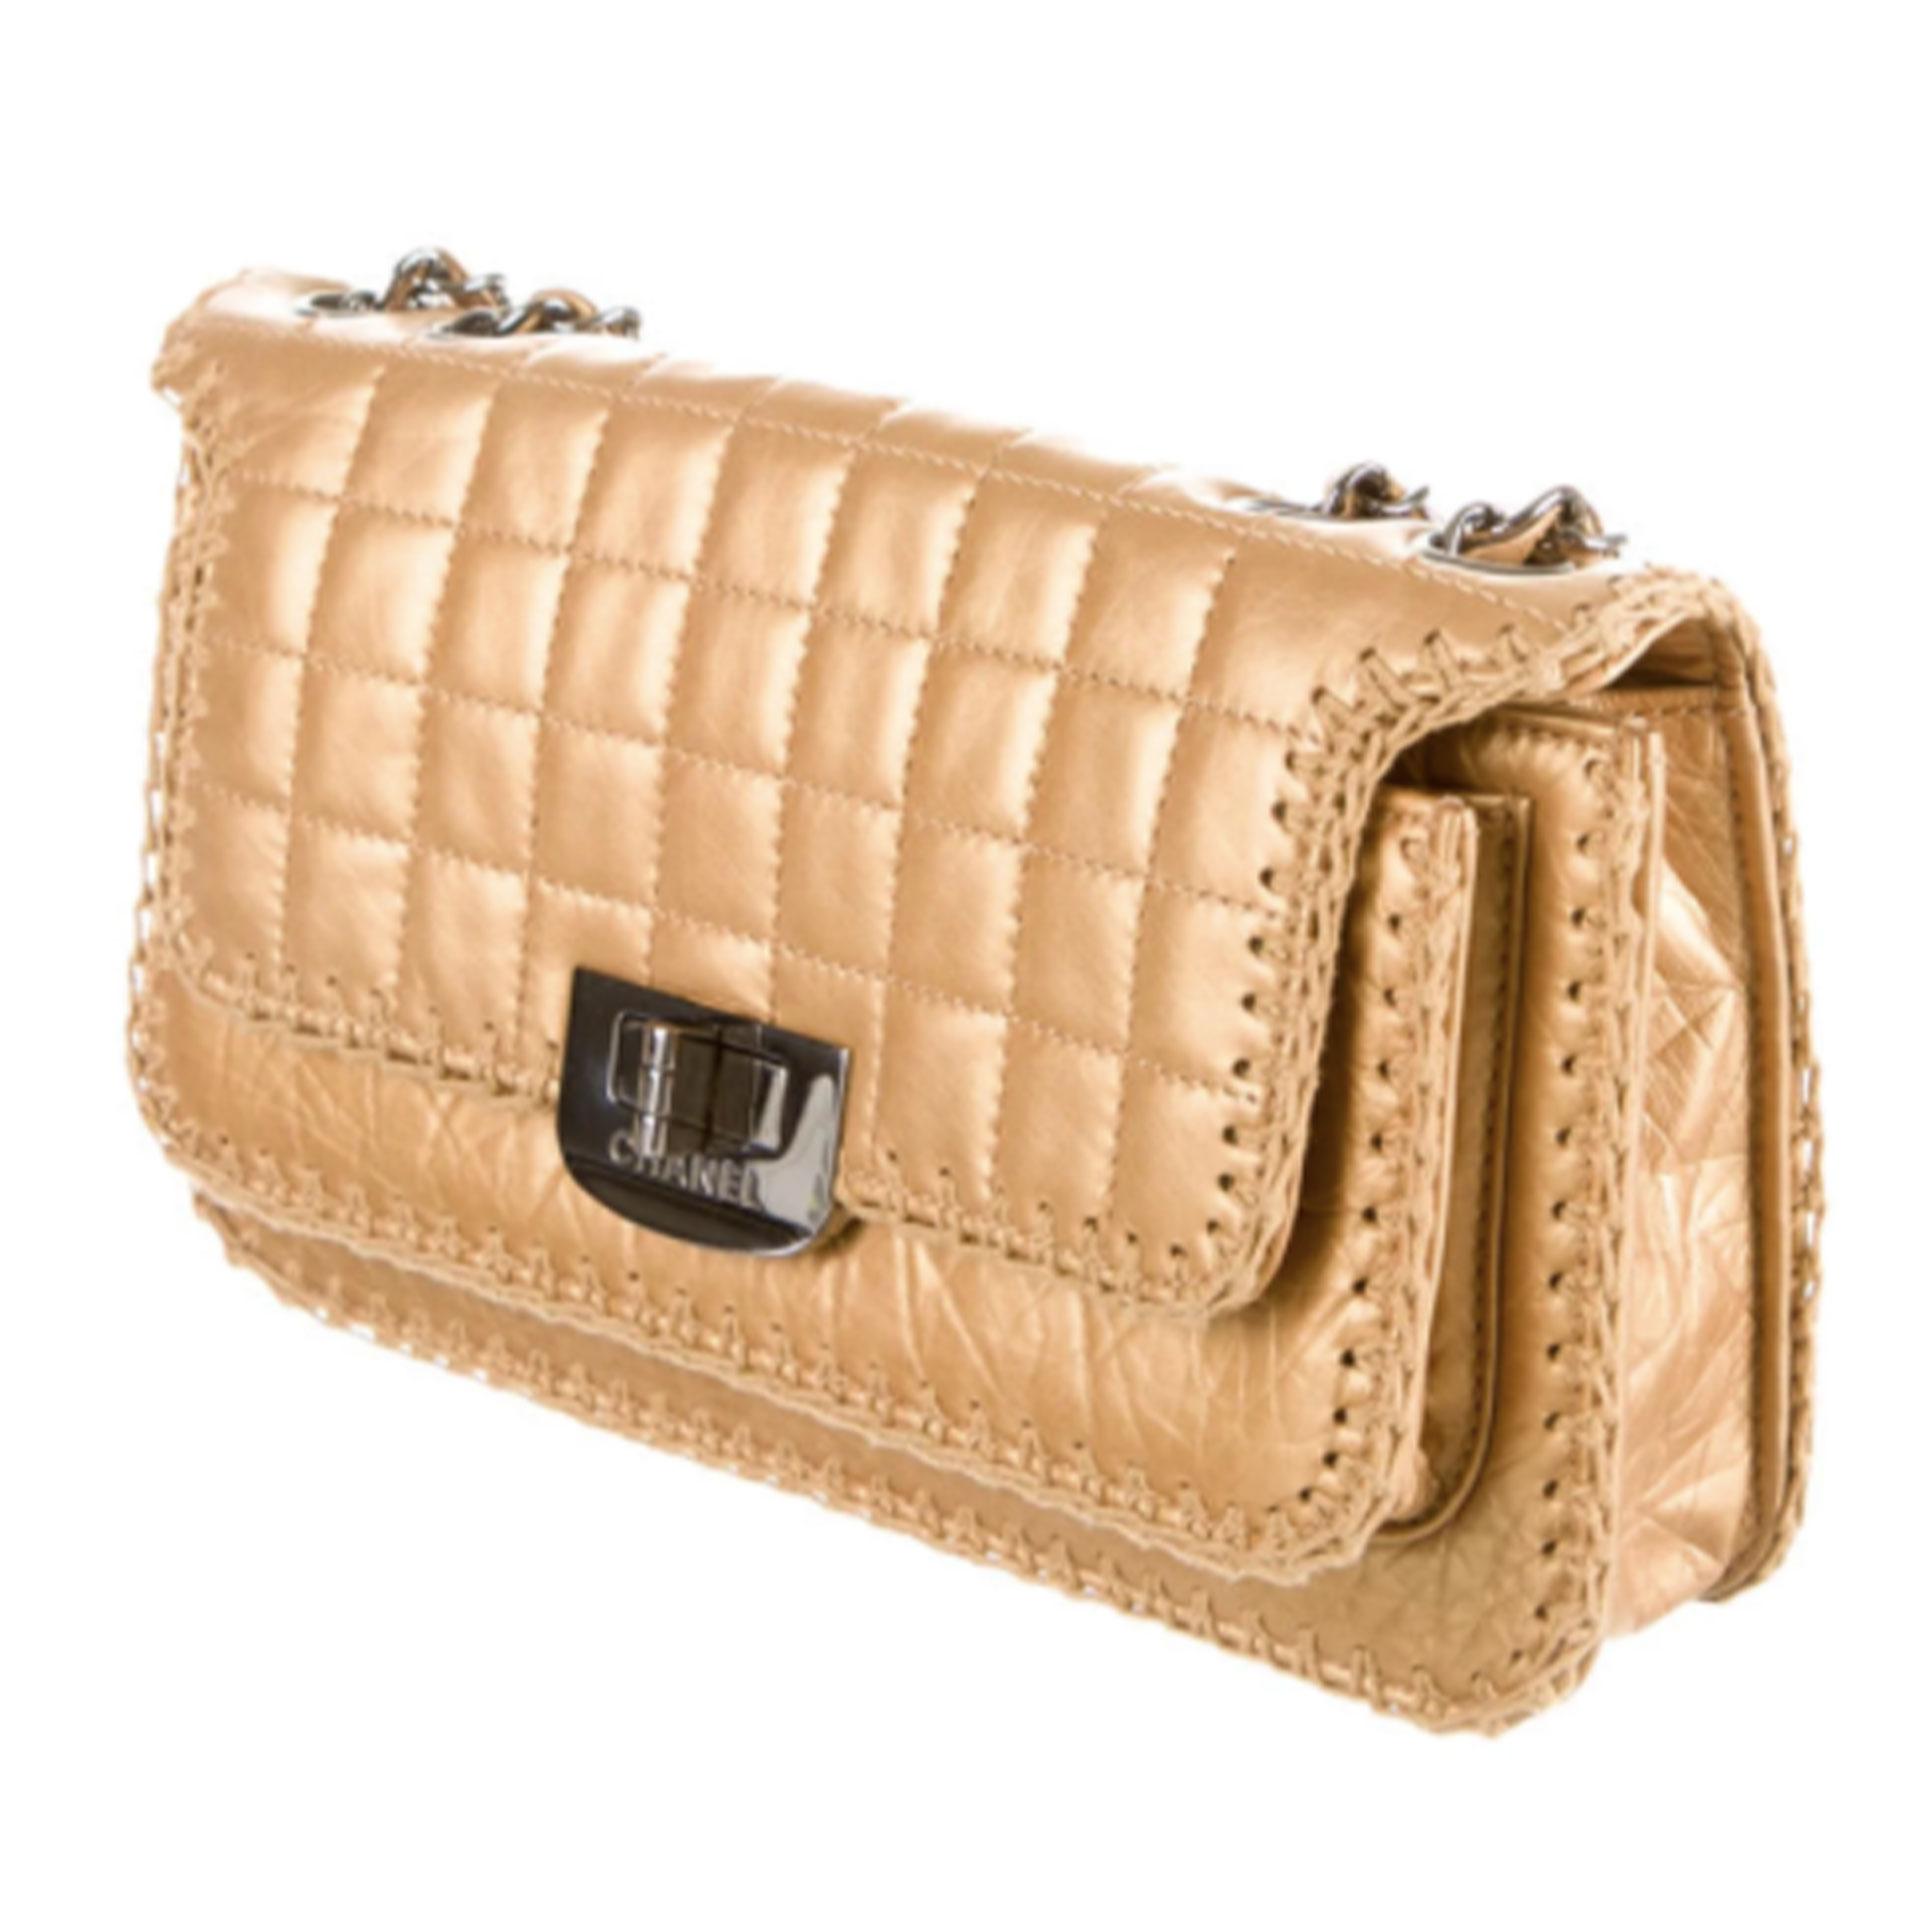 Chanel Whipstitch Flap Bag 

Metallic gold reissue quilted leather medium-small Chanel bag with gunmetal hardware, contrast fabric whipstitch trim throughout, dual leather and chain-link shoulder straps, single exterior pocket at front, metallic